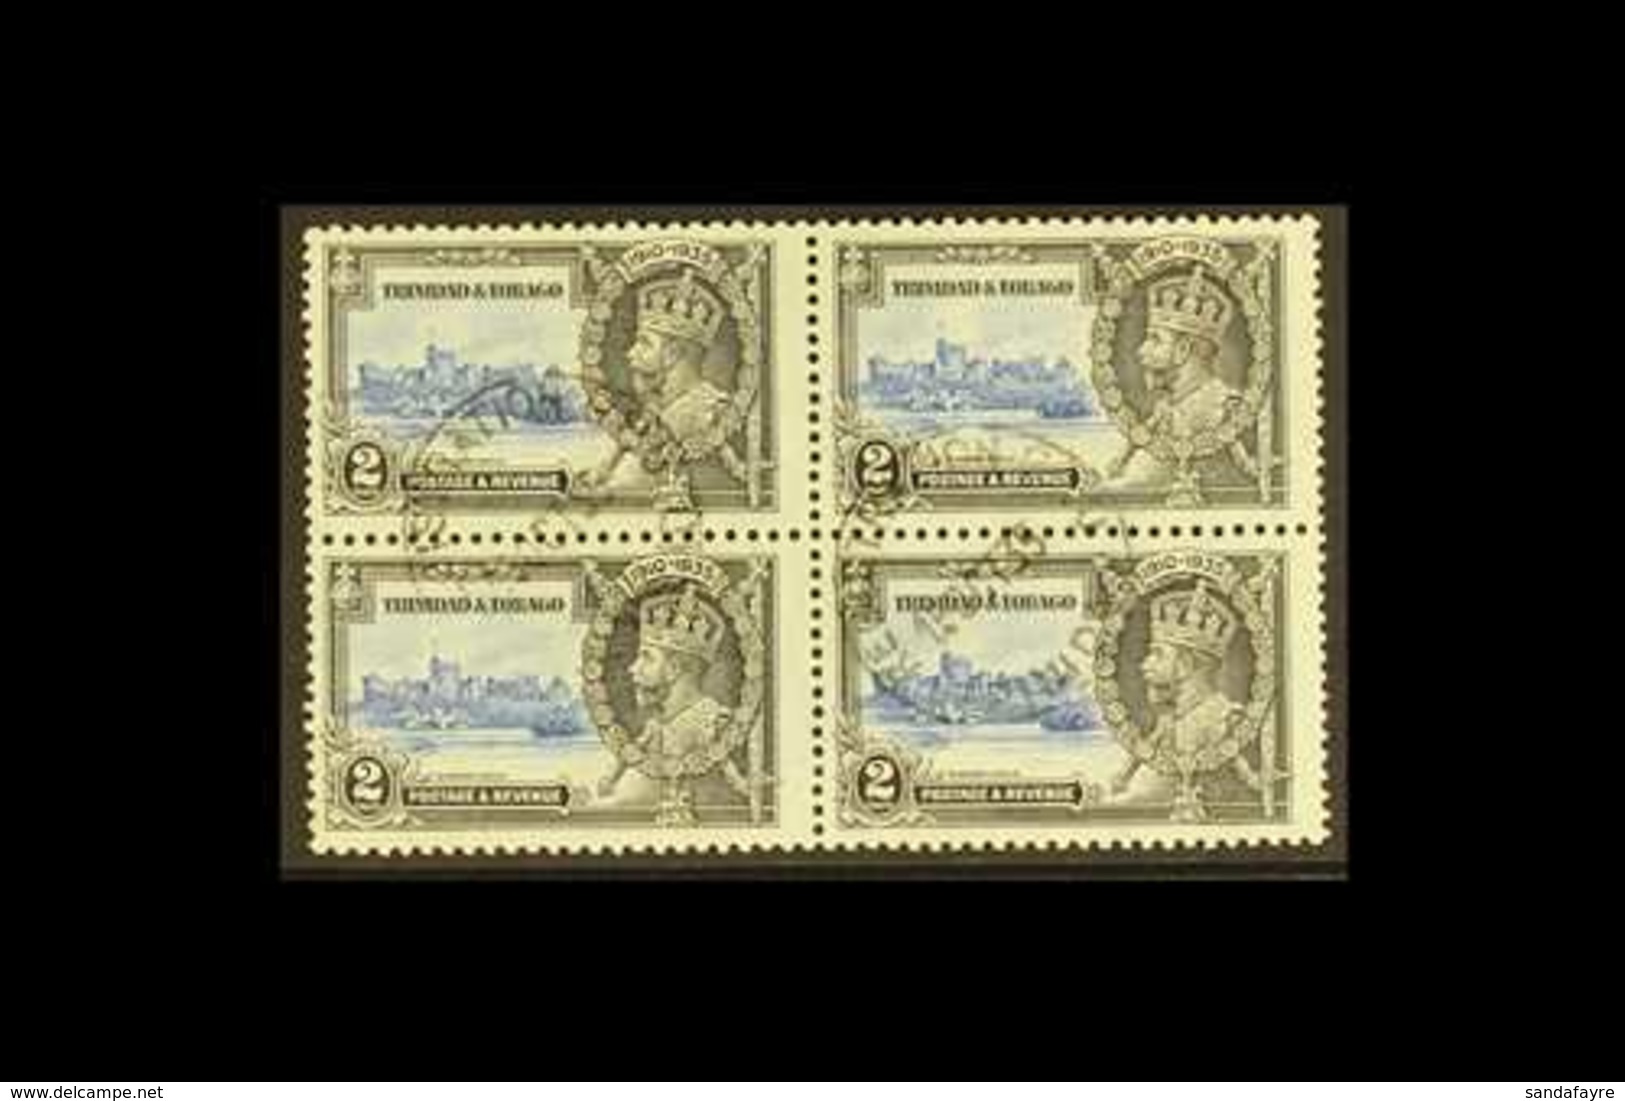 1935  2c Ultramarine And Grey Black Jubilee, Variety "Extra Flagstaff", SG 239a, In A Used Block Of 4 With Normals. For  - Trinidad & Tobago (...-1961)